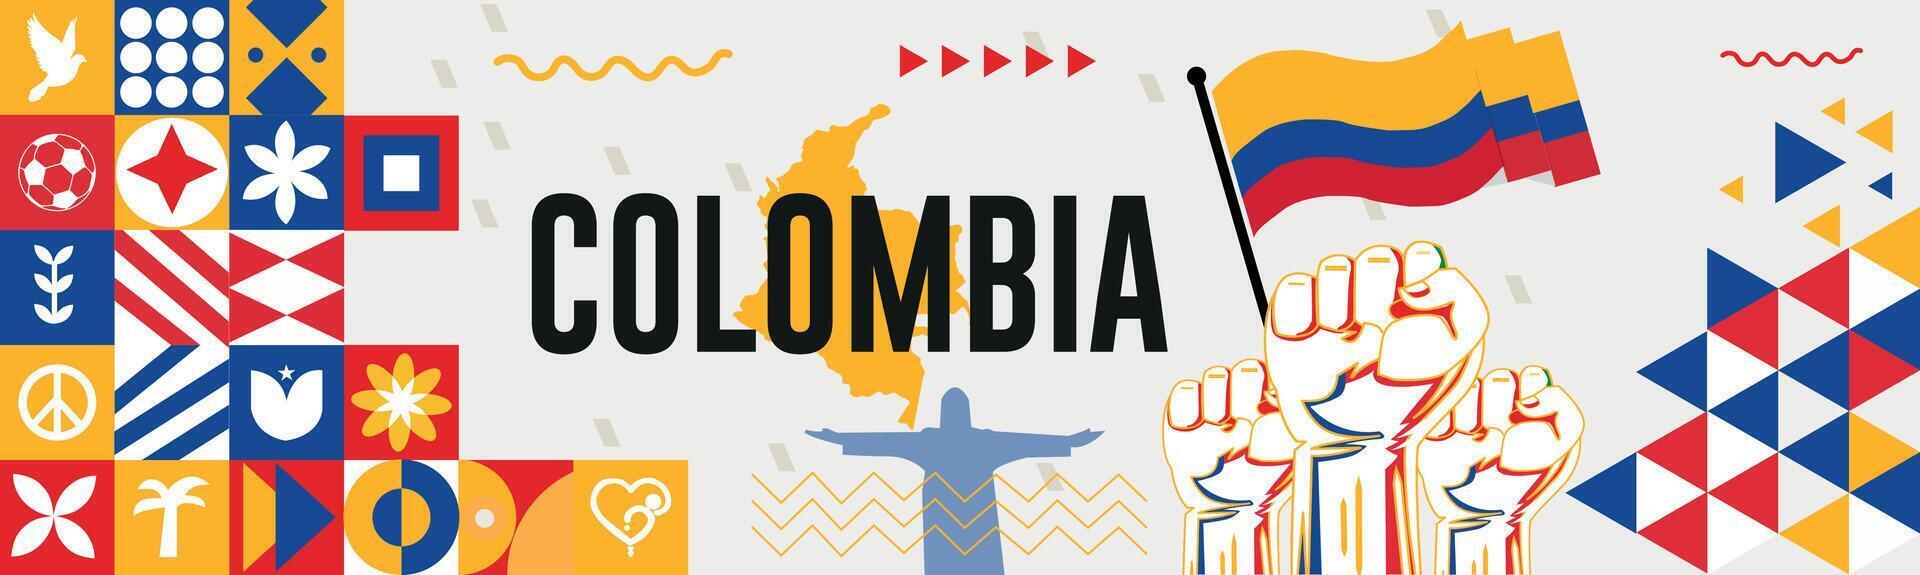 Colombia Map and raised fists. National day or Independence day design for AZERBAIJAN celebration. Modern retro design with abstract icons. vector